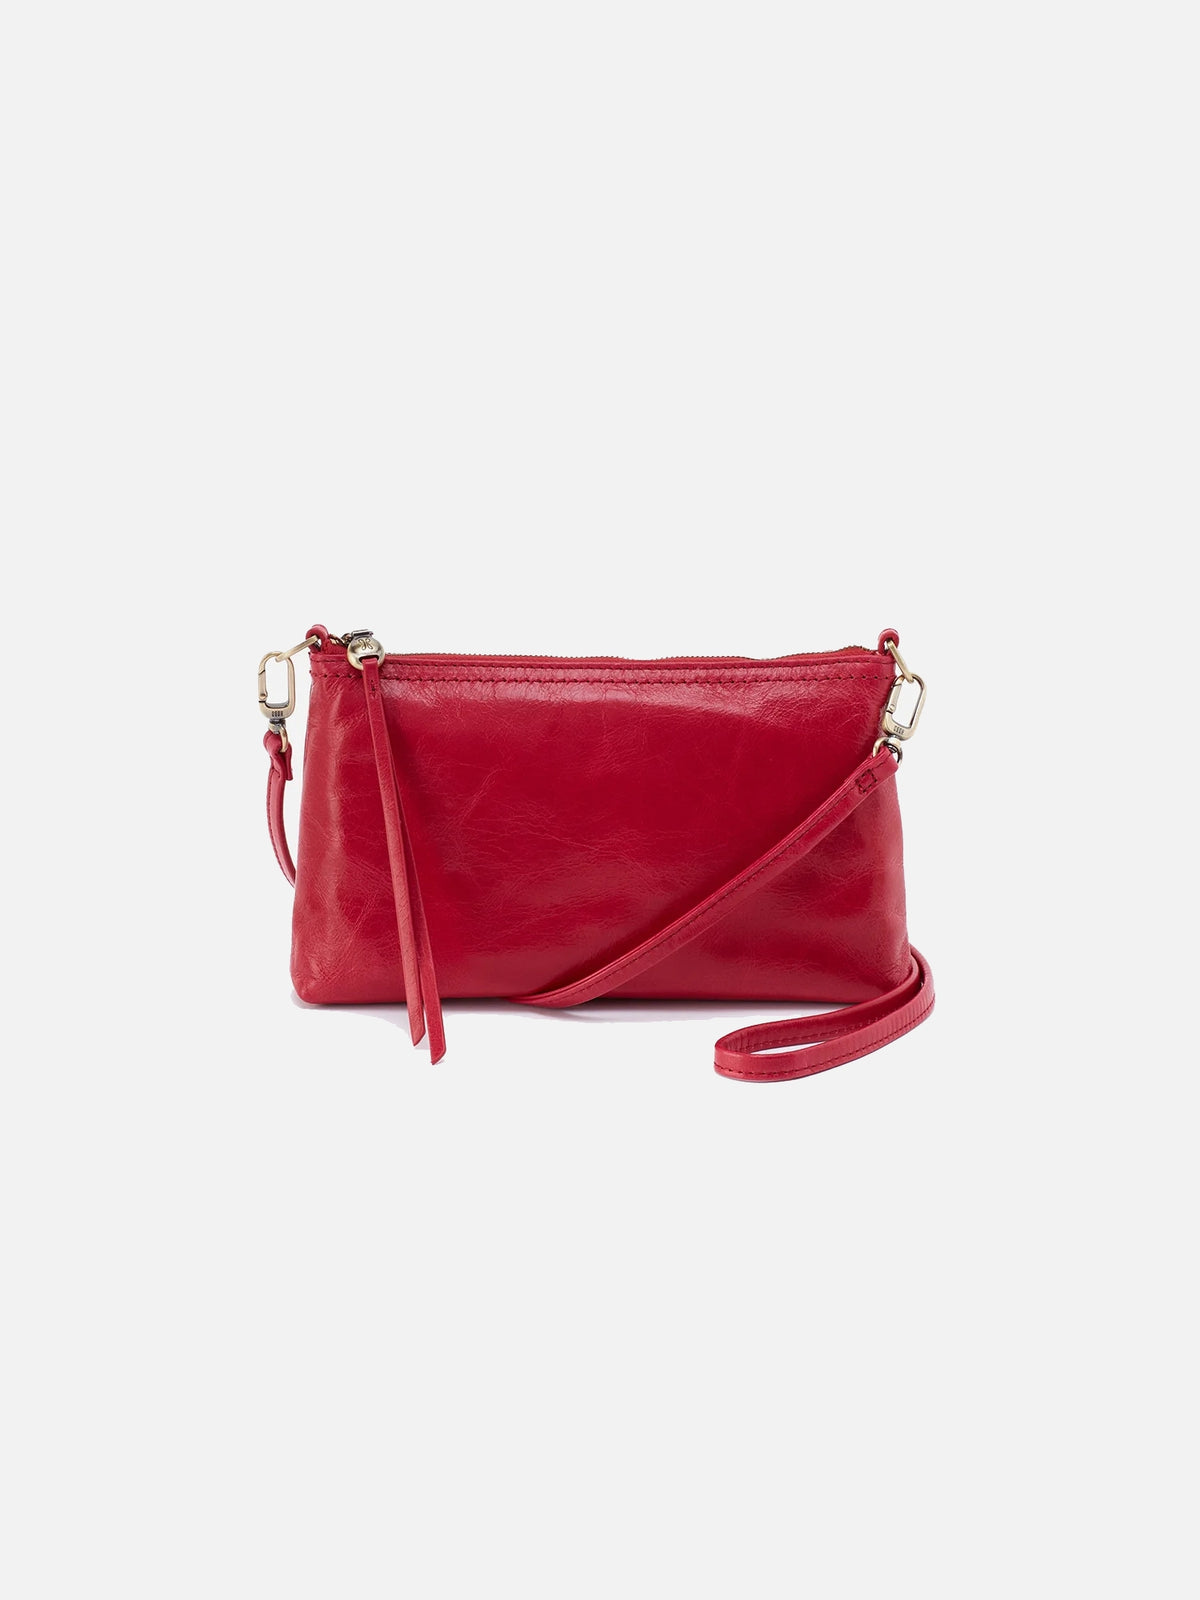 hobo darcy convertible 3-way crossbody bag in claret red polished leather